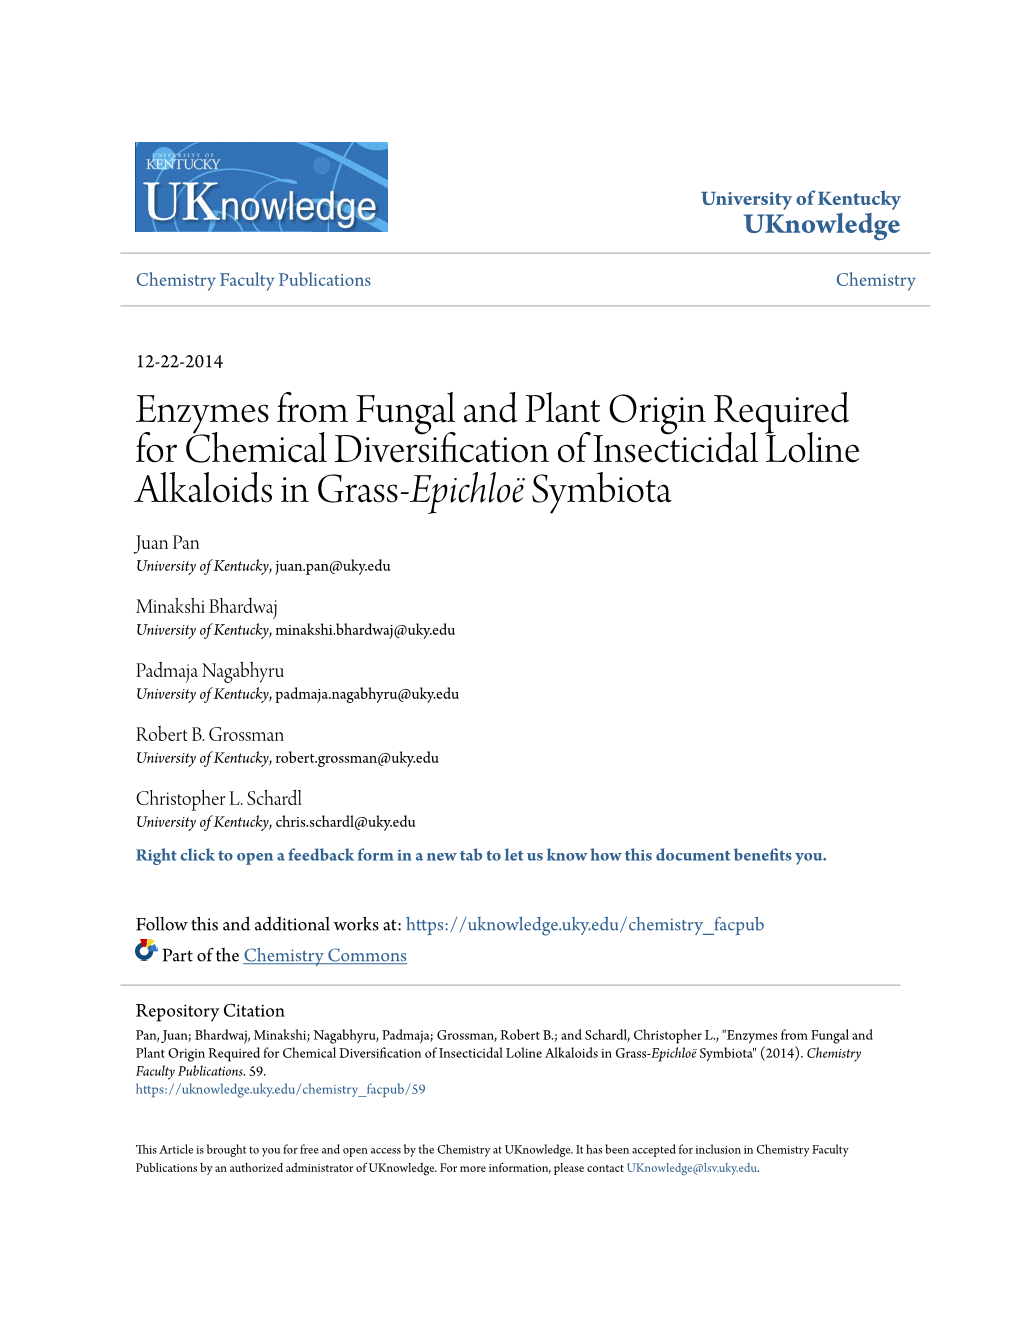 Enzymes from Fungal and Plant Origin Required For